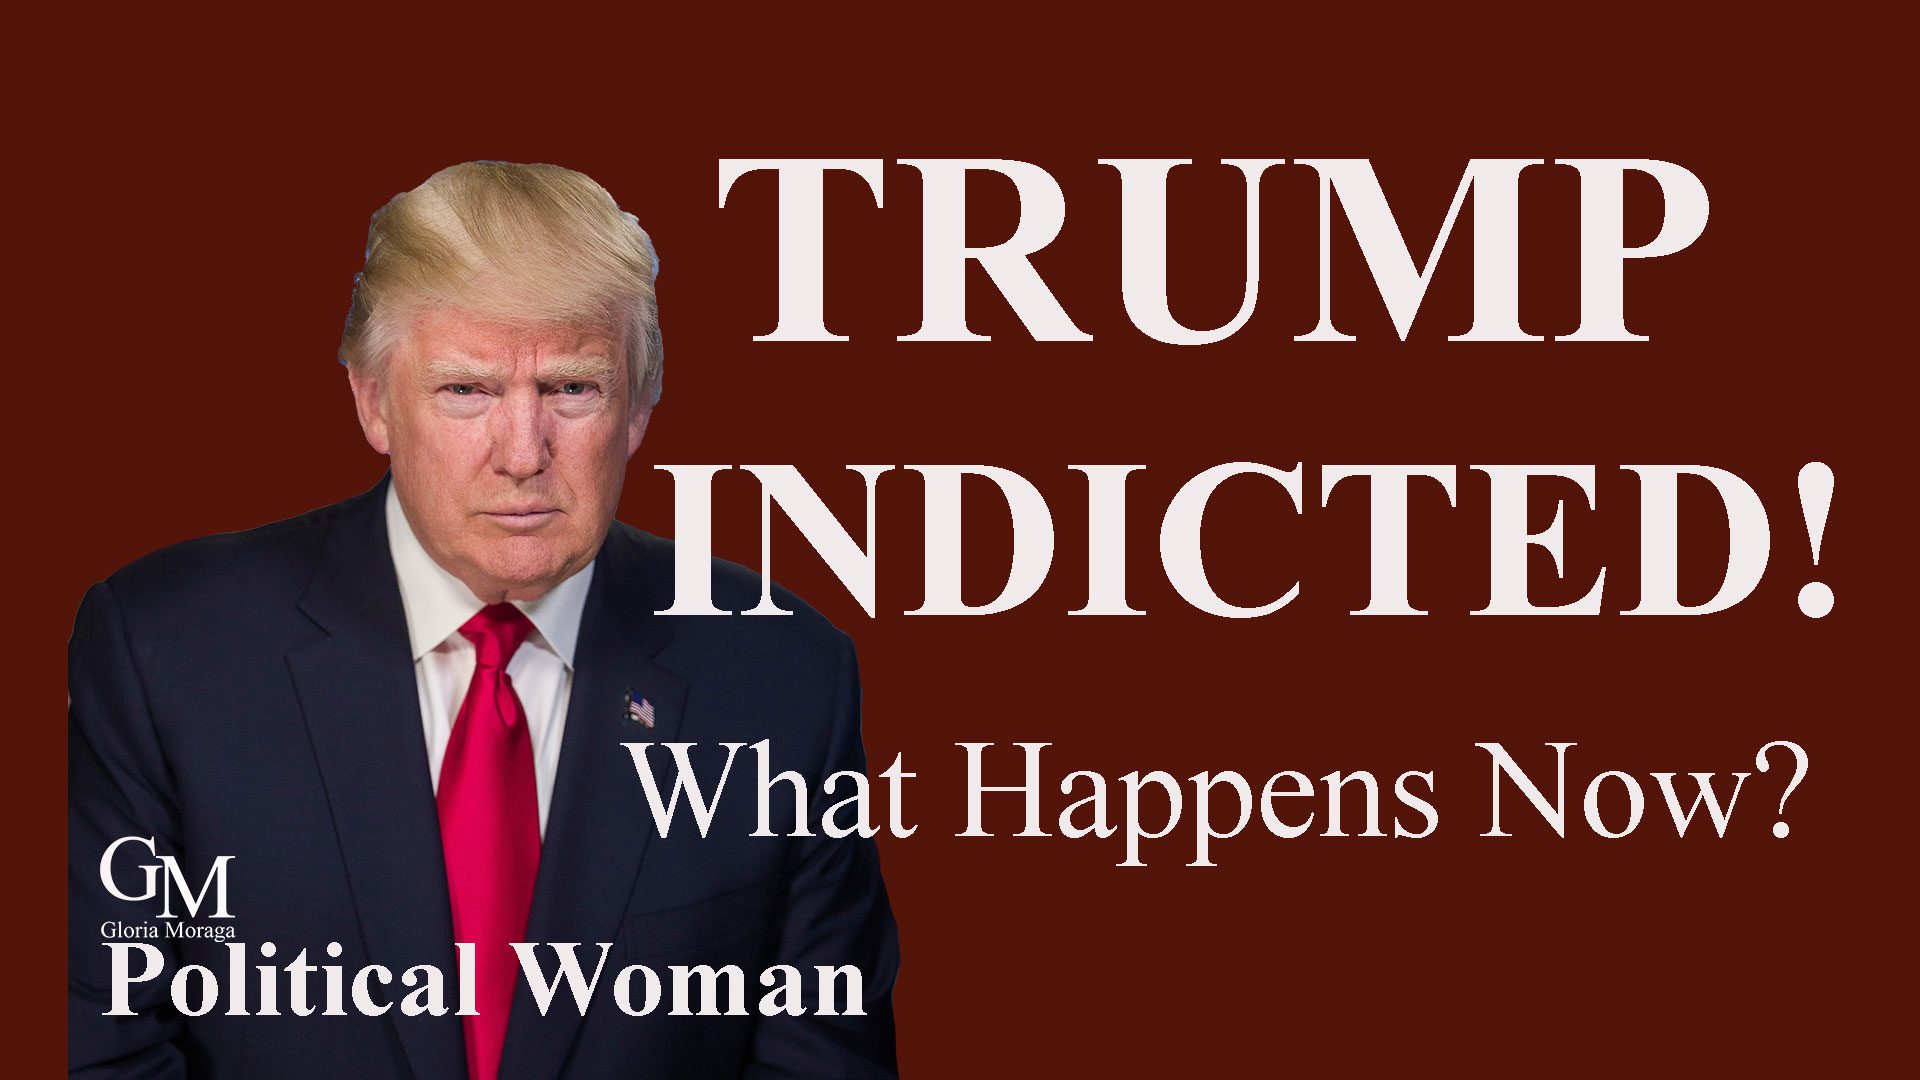 Trump Indicted. What Happens Now?